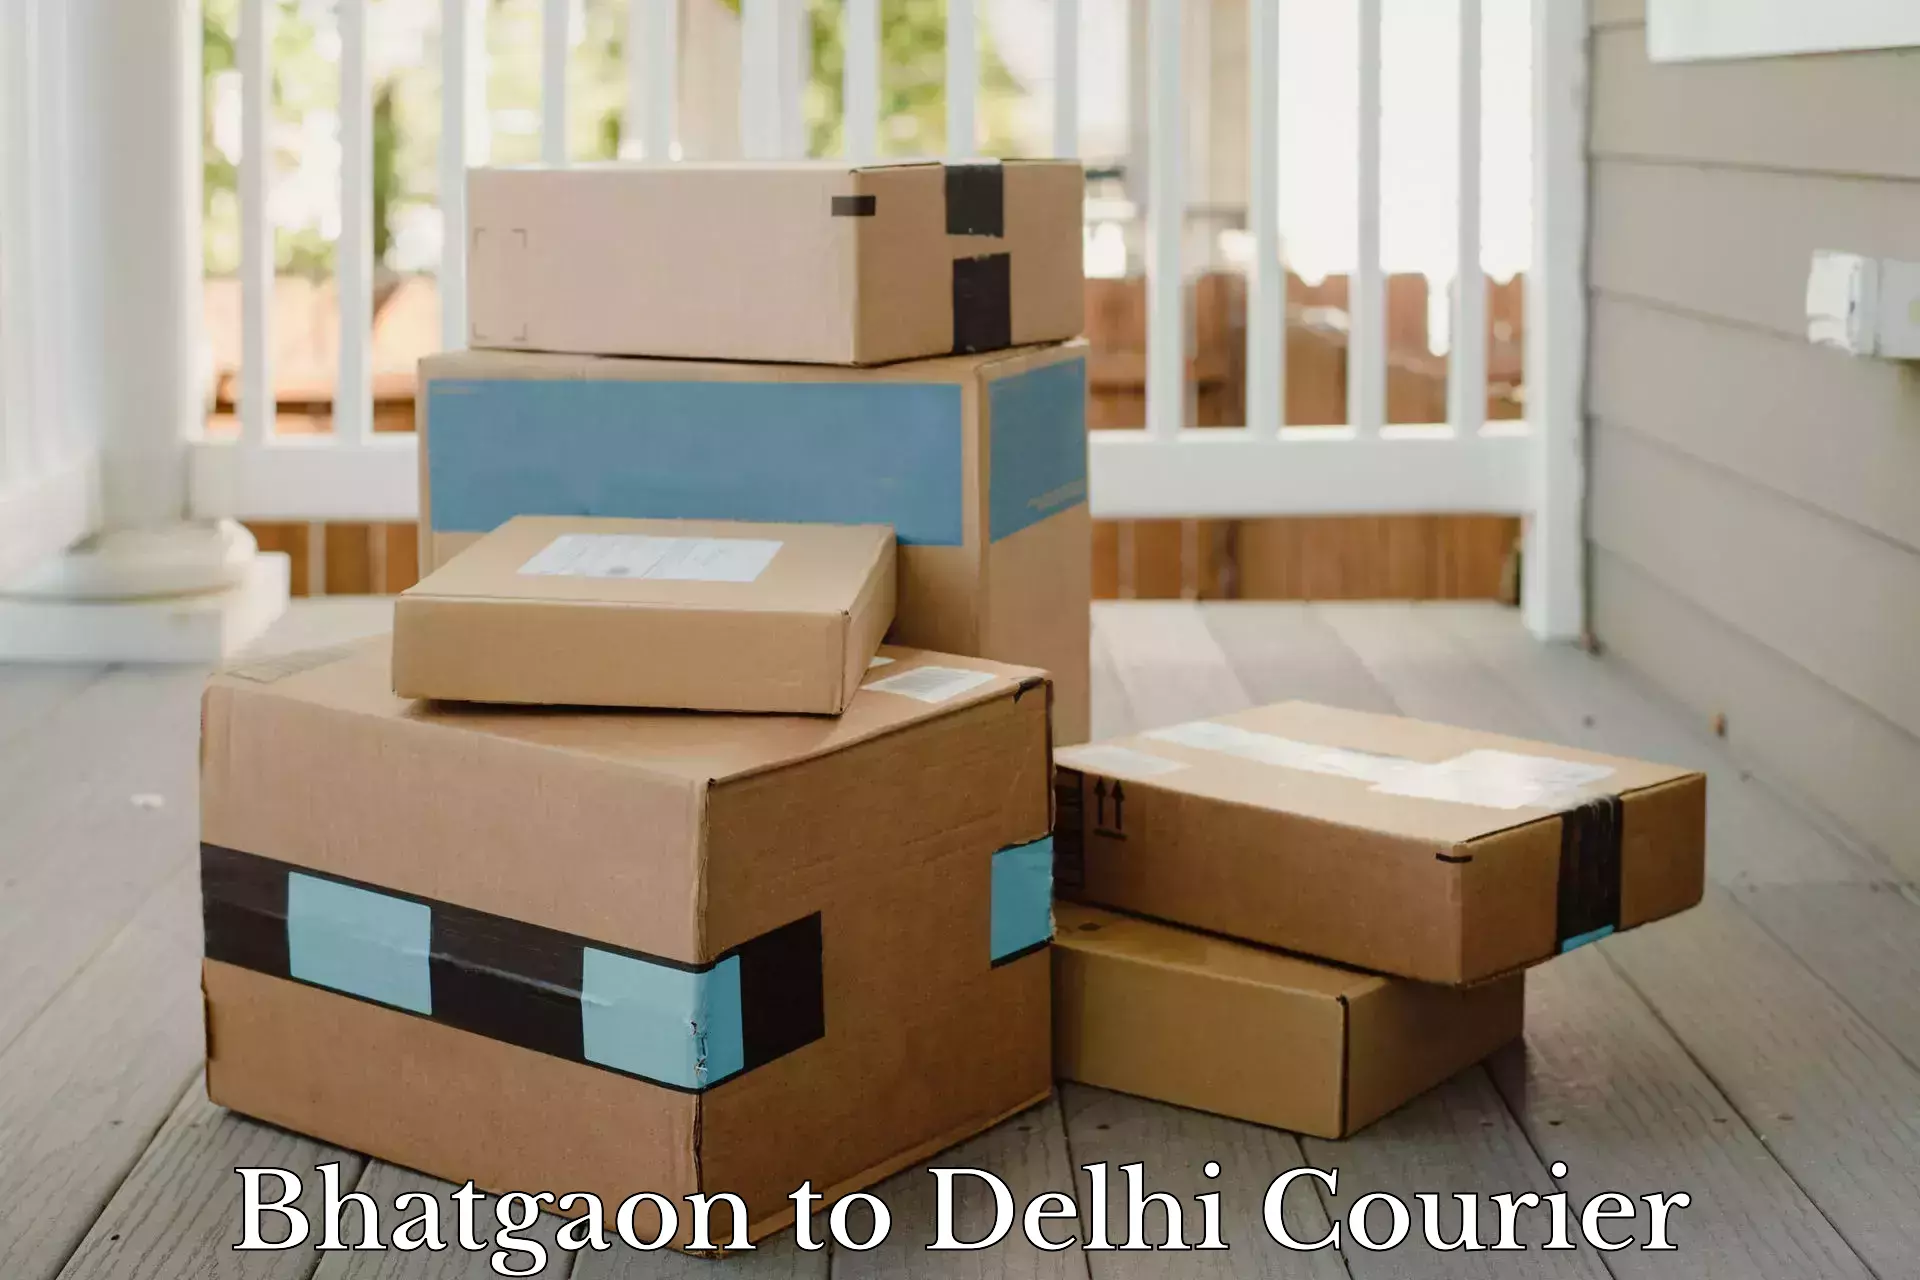 Same-day delivery solutions Bhatgaon to Delhi